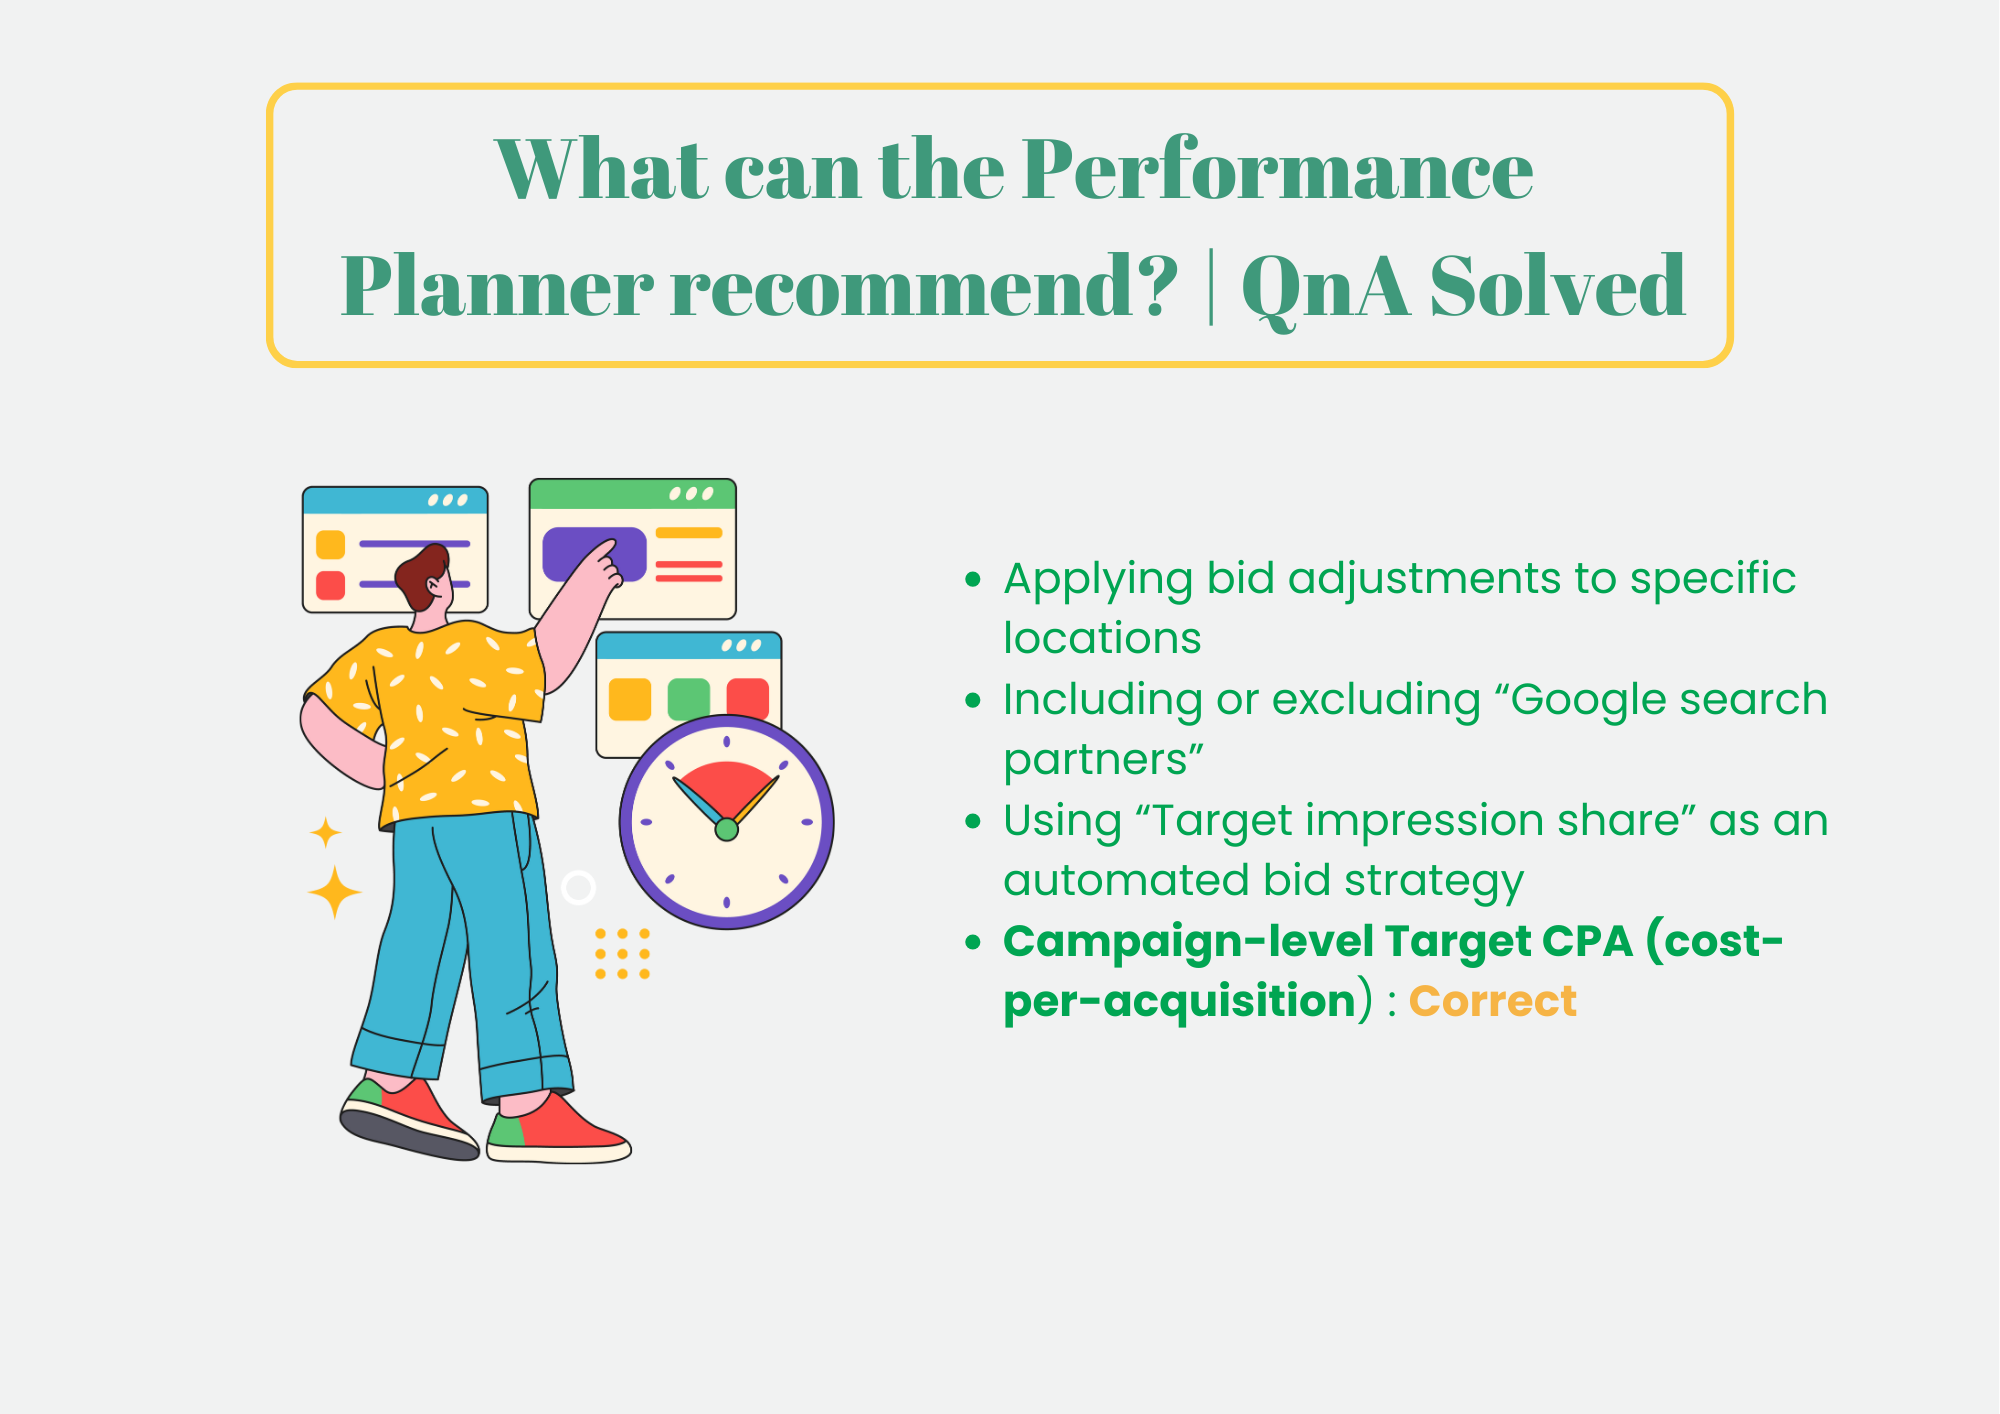 What can the Performance Planner recommend?